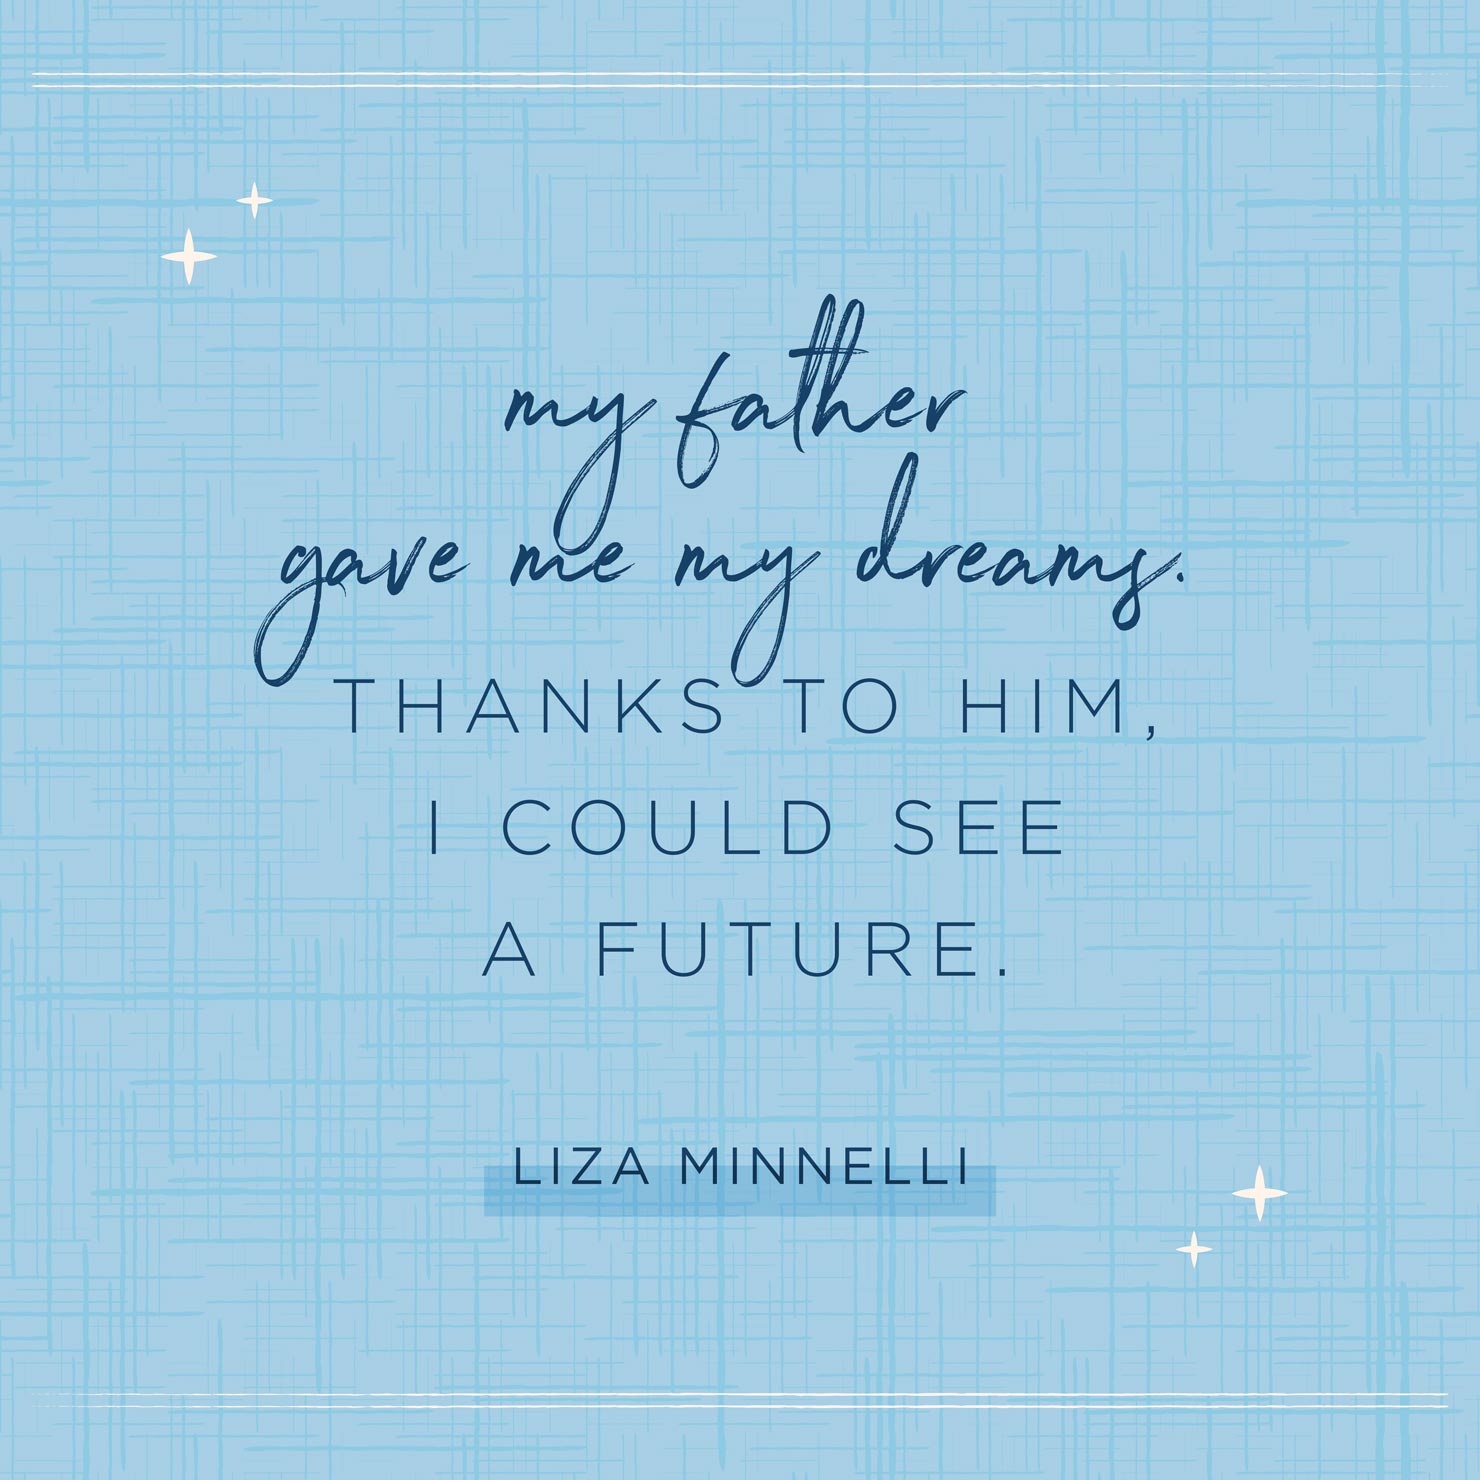 my father gave me my dreams. thanks to him, i could see a future. liza minnelli